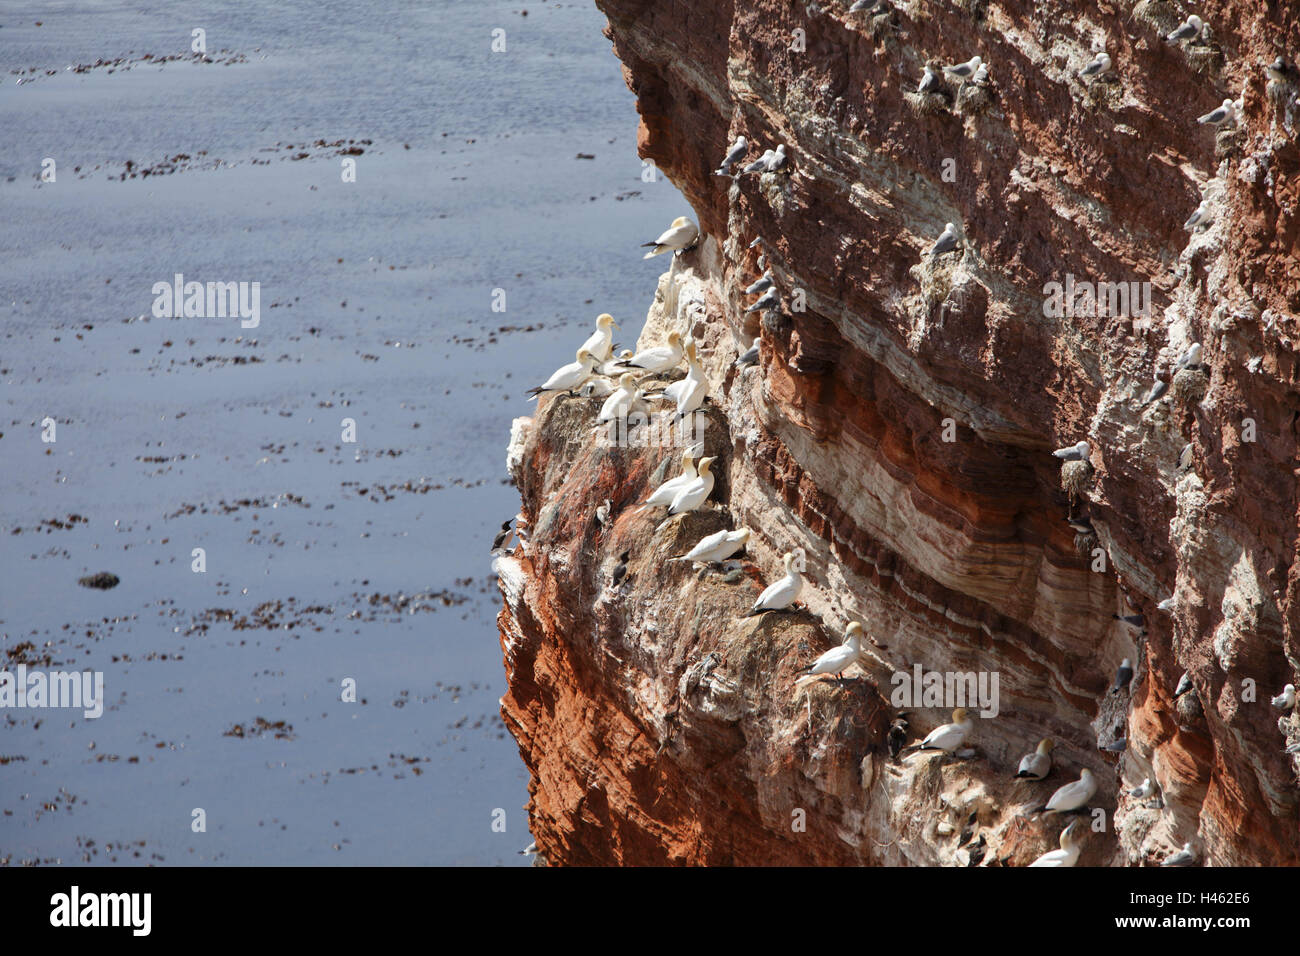 Germany, Schleswig - Holstein, Helgoland, guillemot rock, sea birds, the North Sea, island, ocean-going island, bird's rock, rock, bile projection, rock, new red sandstone, brown, red, idiot's guillemots, birds, sea bird colony, nesting places, brood, young animals, animals, sit, nature, nature reserve, sea, low tide, Stock Photo